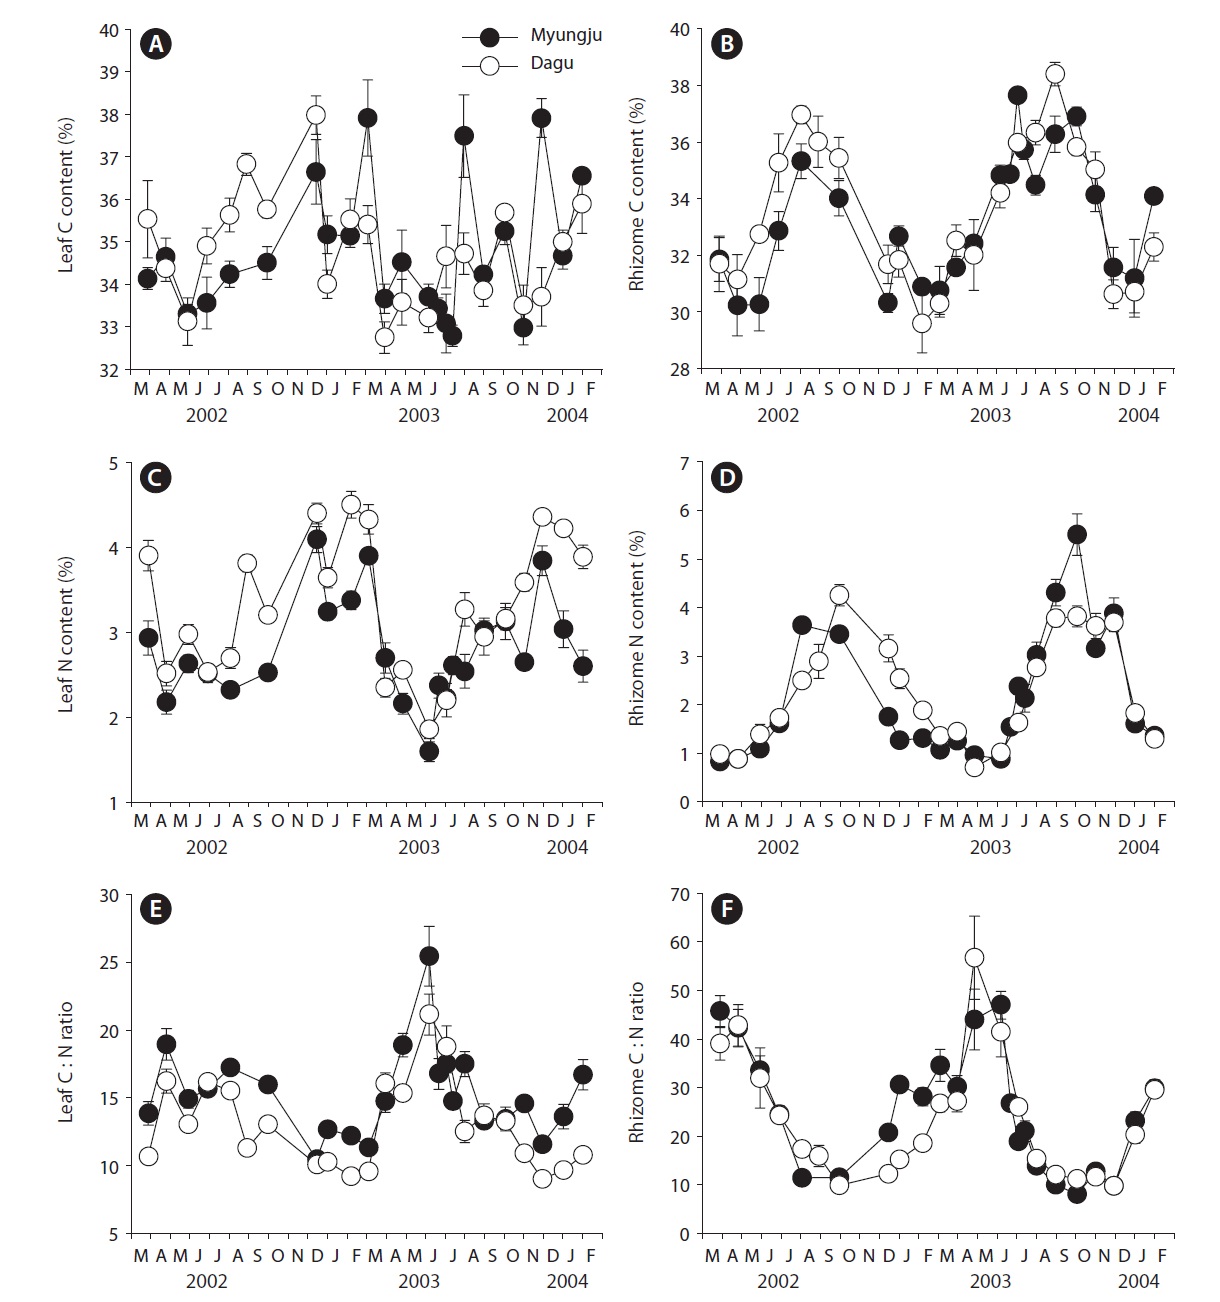 Seasonal variations in leaf and rhizome tissue carbon (A & B), nitrogen (C & D), and C : N ratios (E & F) at the two study sites in Jindong Bay from March 2002 to January 2004. Values represent means ± SE.